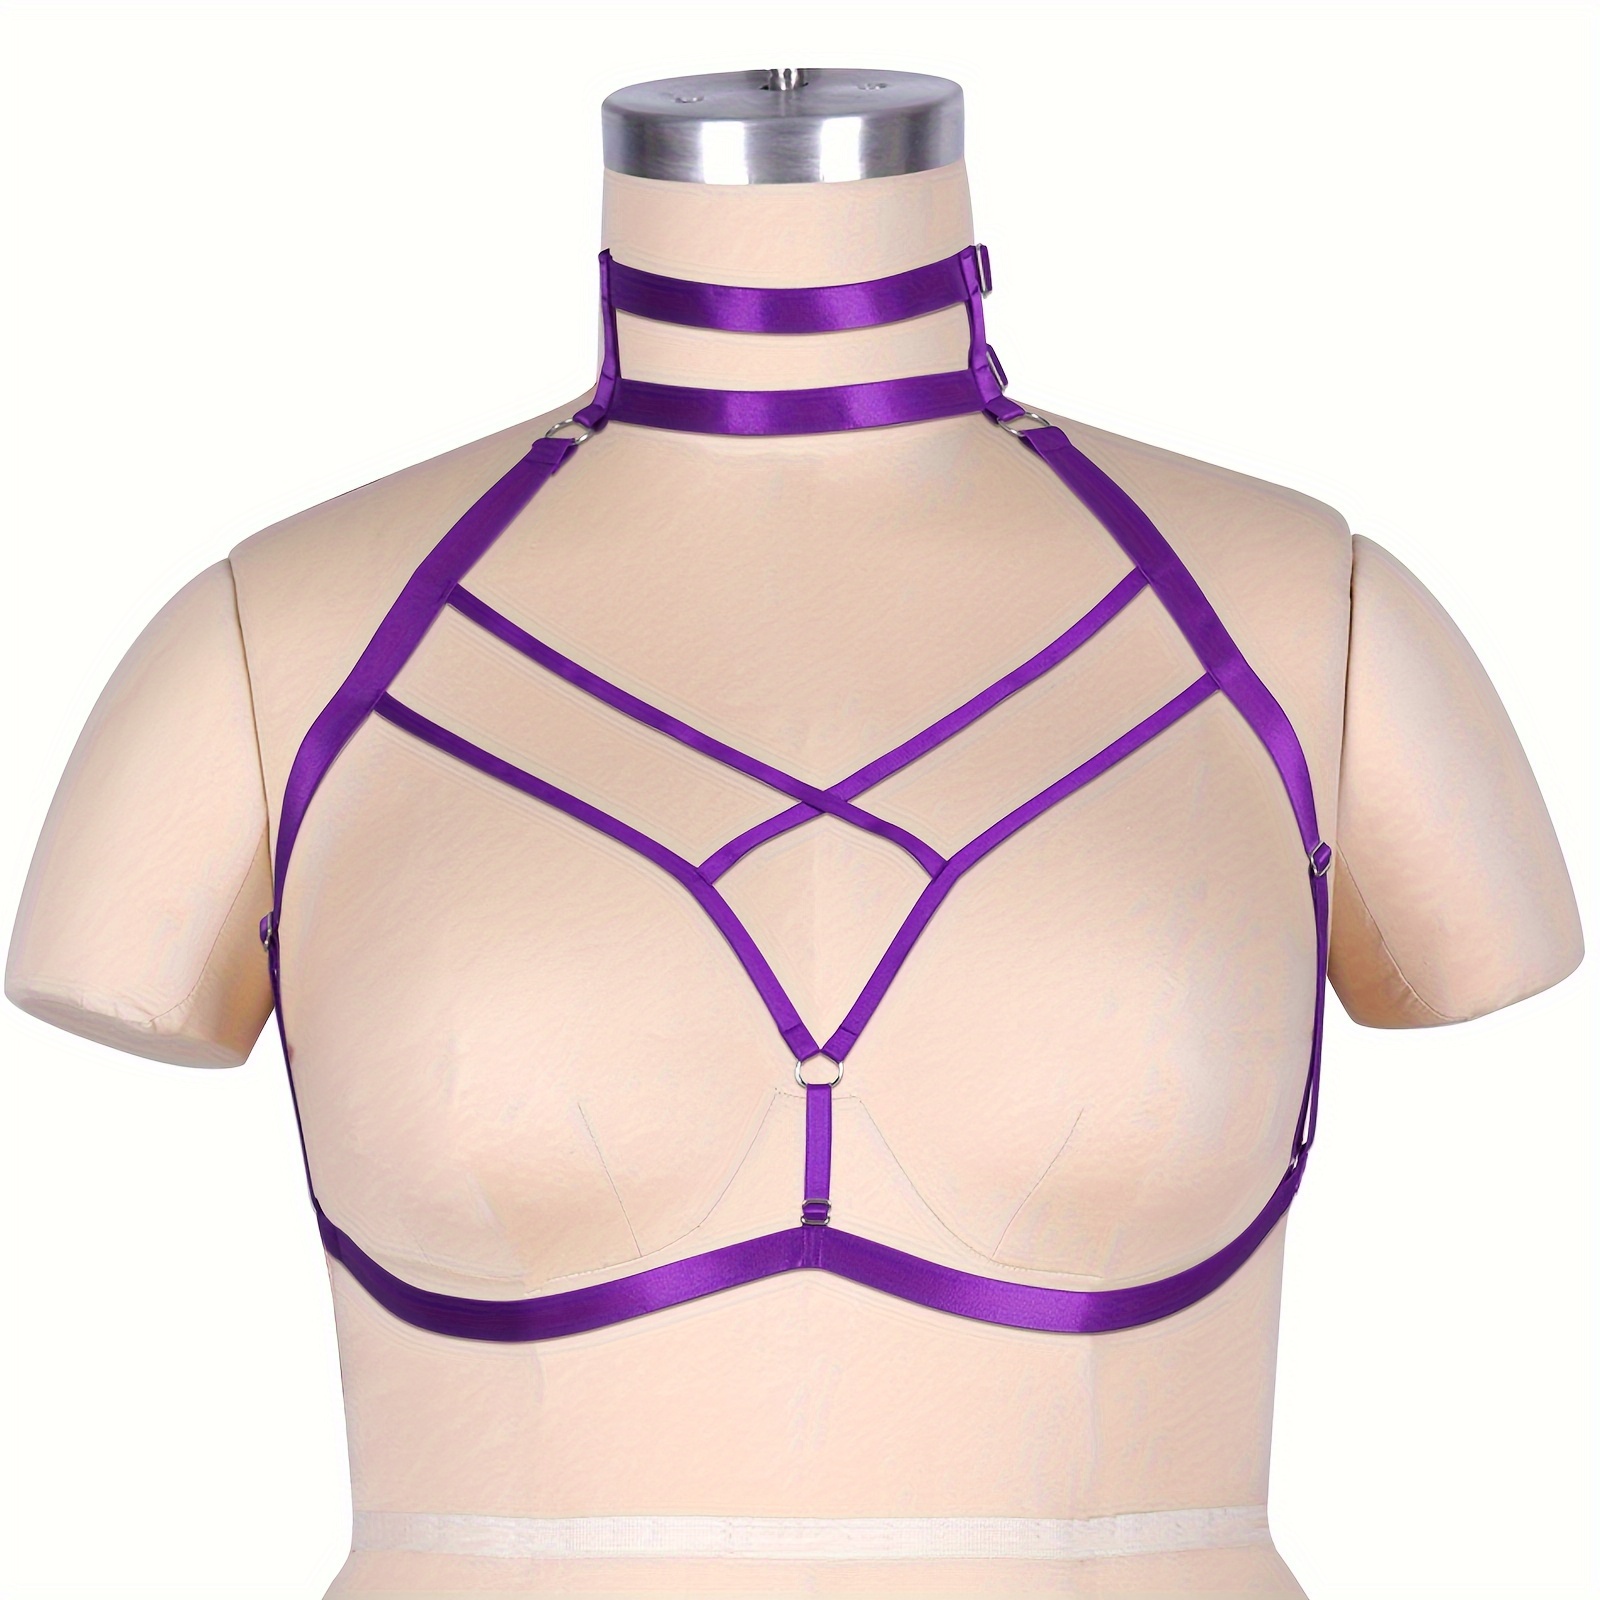 Women's Naughty Bow Lingerie Strappy Body Cage 3pcs Cupless Bra